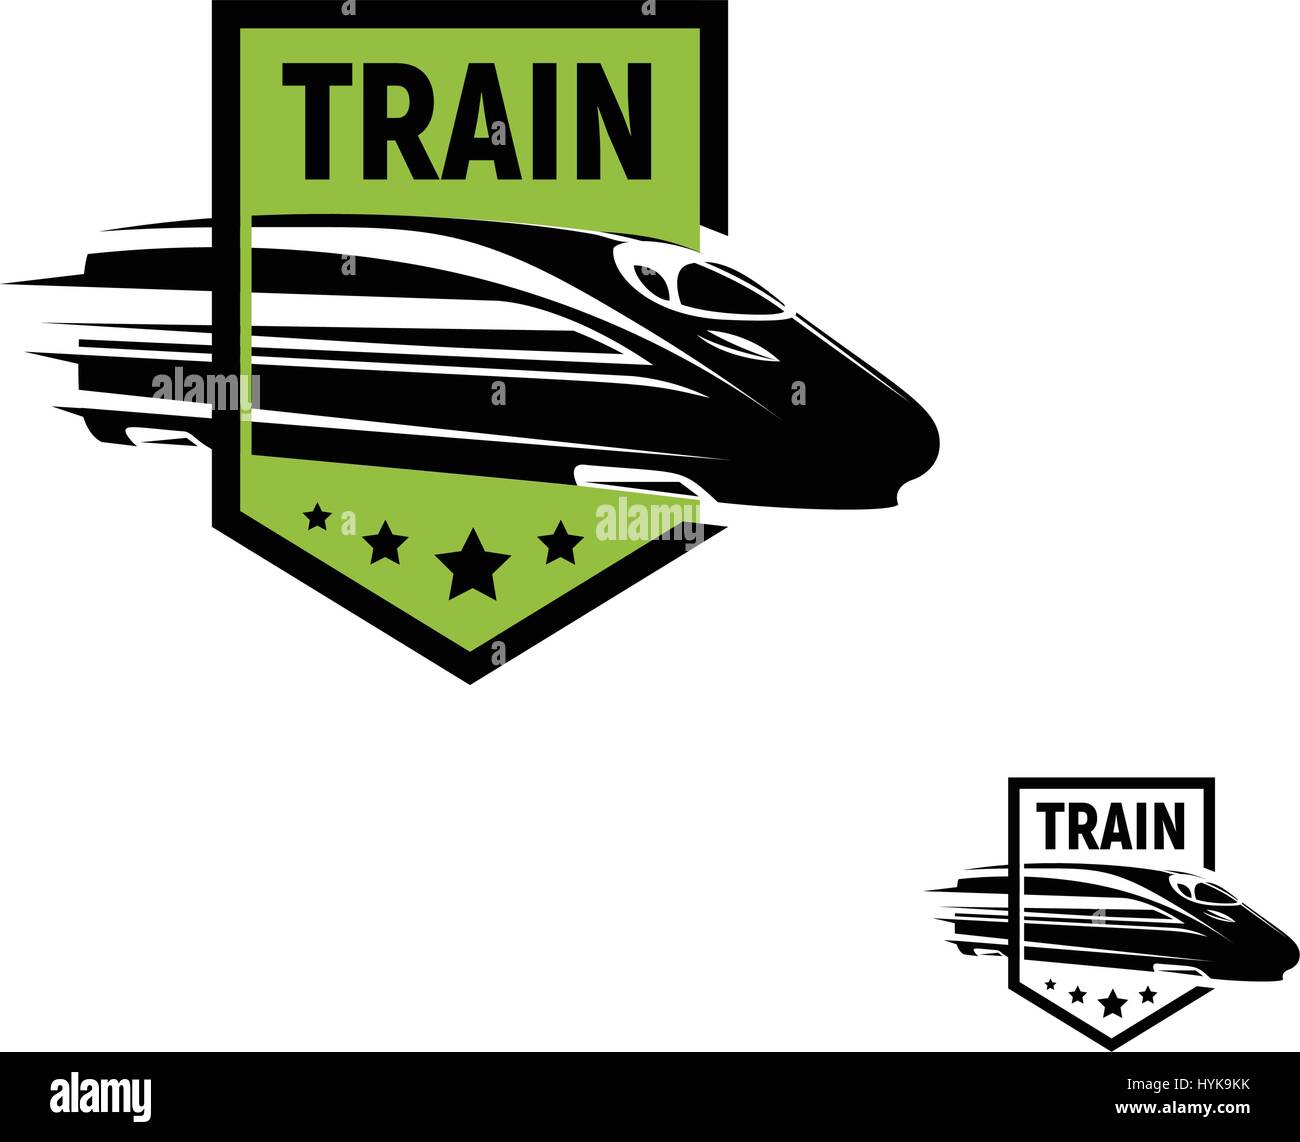 Isolated abstract black color train in green frame logo on white background, monochrome modern railway transport logotype, railroad element in engraving style vector illustration Stock Vector